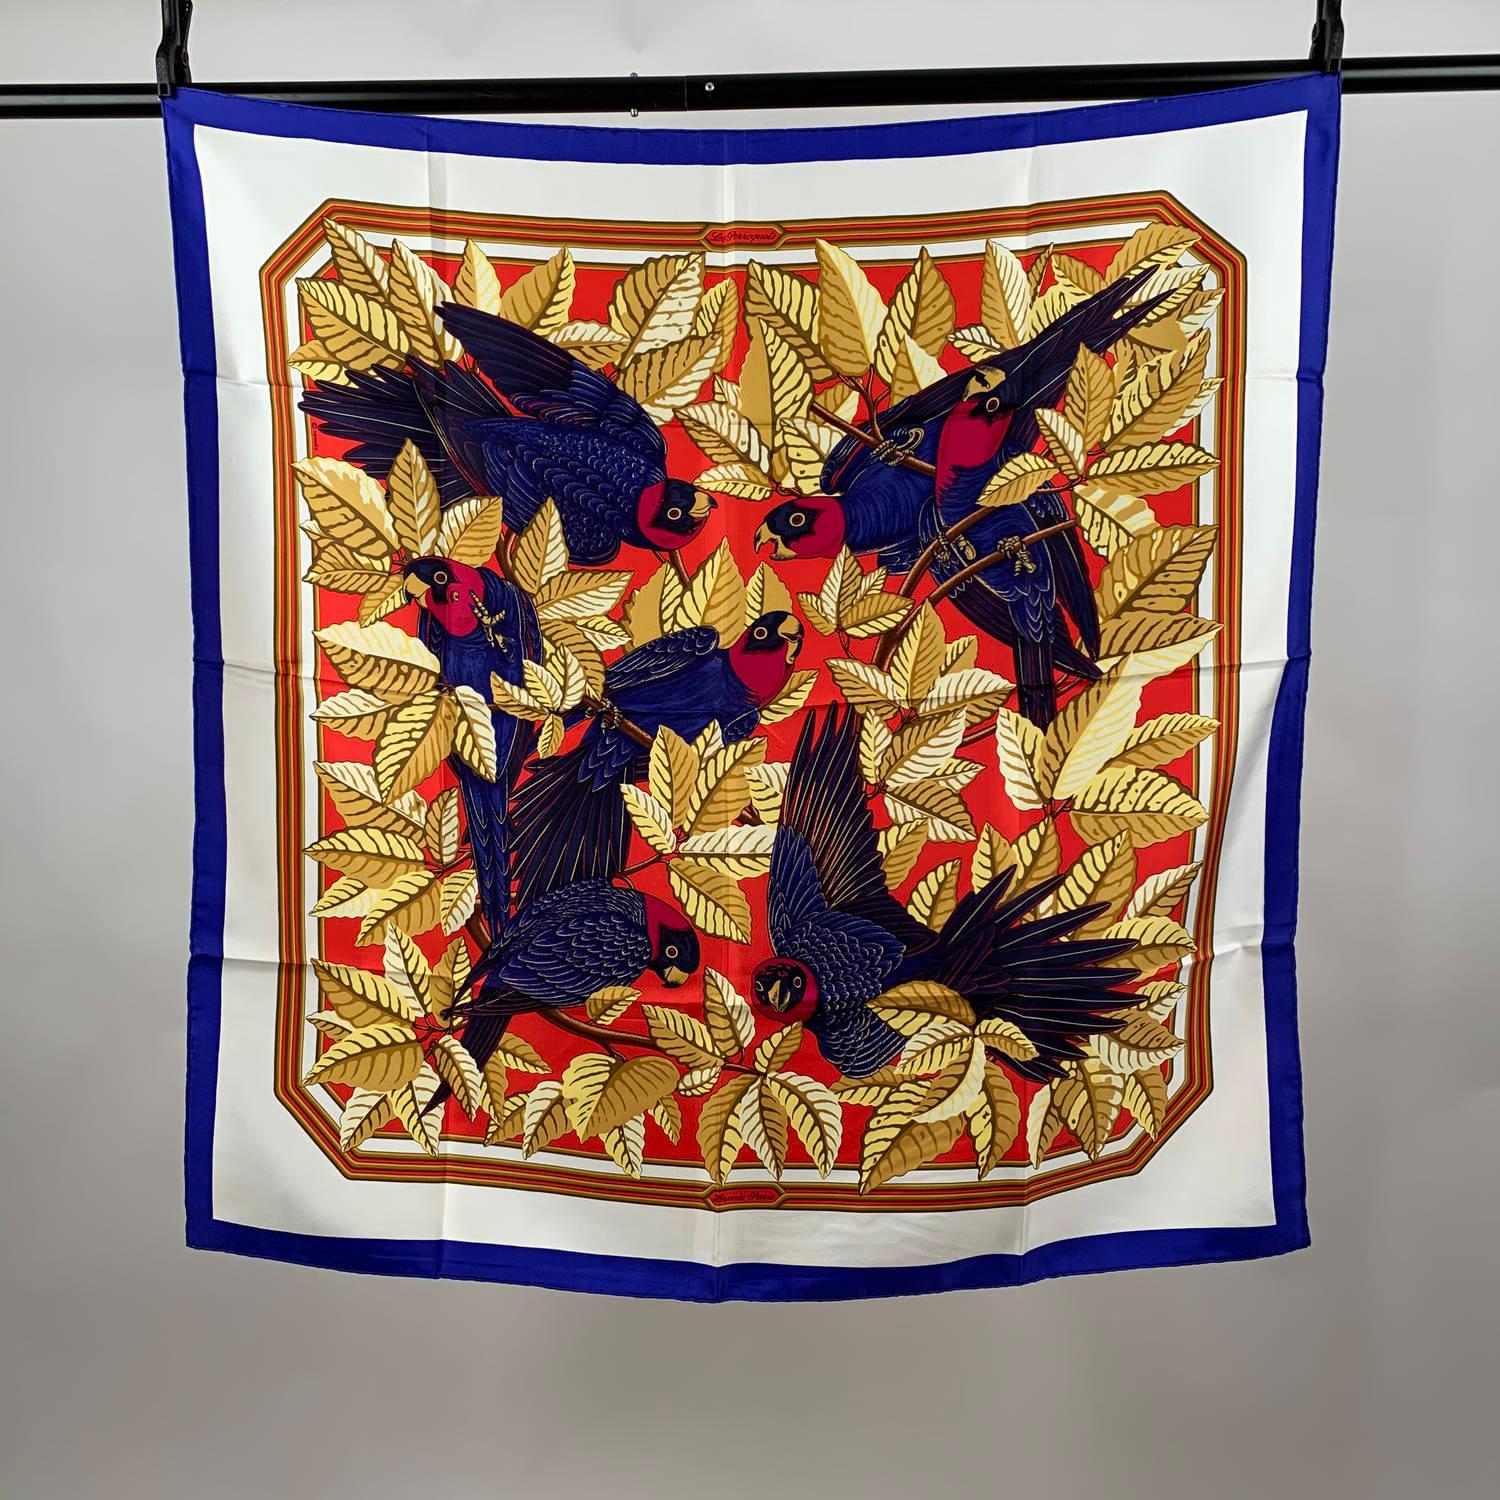 Rare Hermes 'LES PERROQUETS' (The Parrots)silk scarf designed by Joachim Metz  and originally issued in 1984, in different colours, formats and variations of. It features a splendid bold and brilliant design of blue perrots and yellow gold leaves.